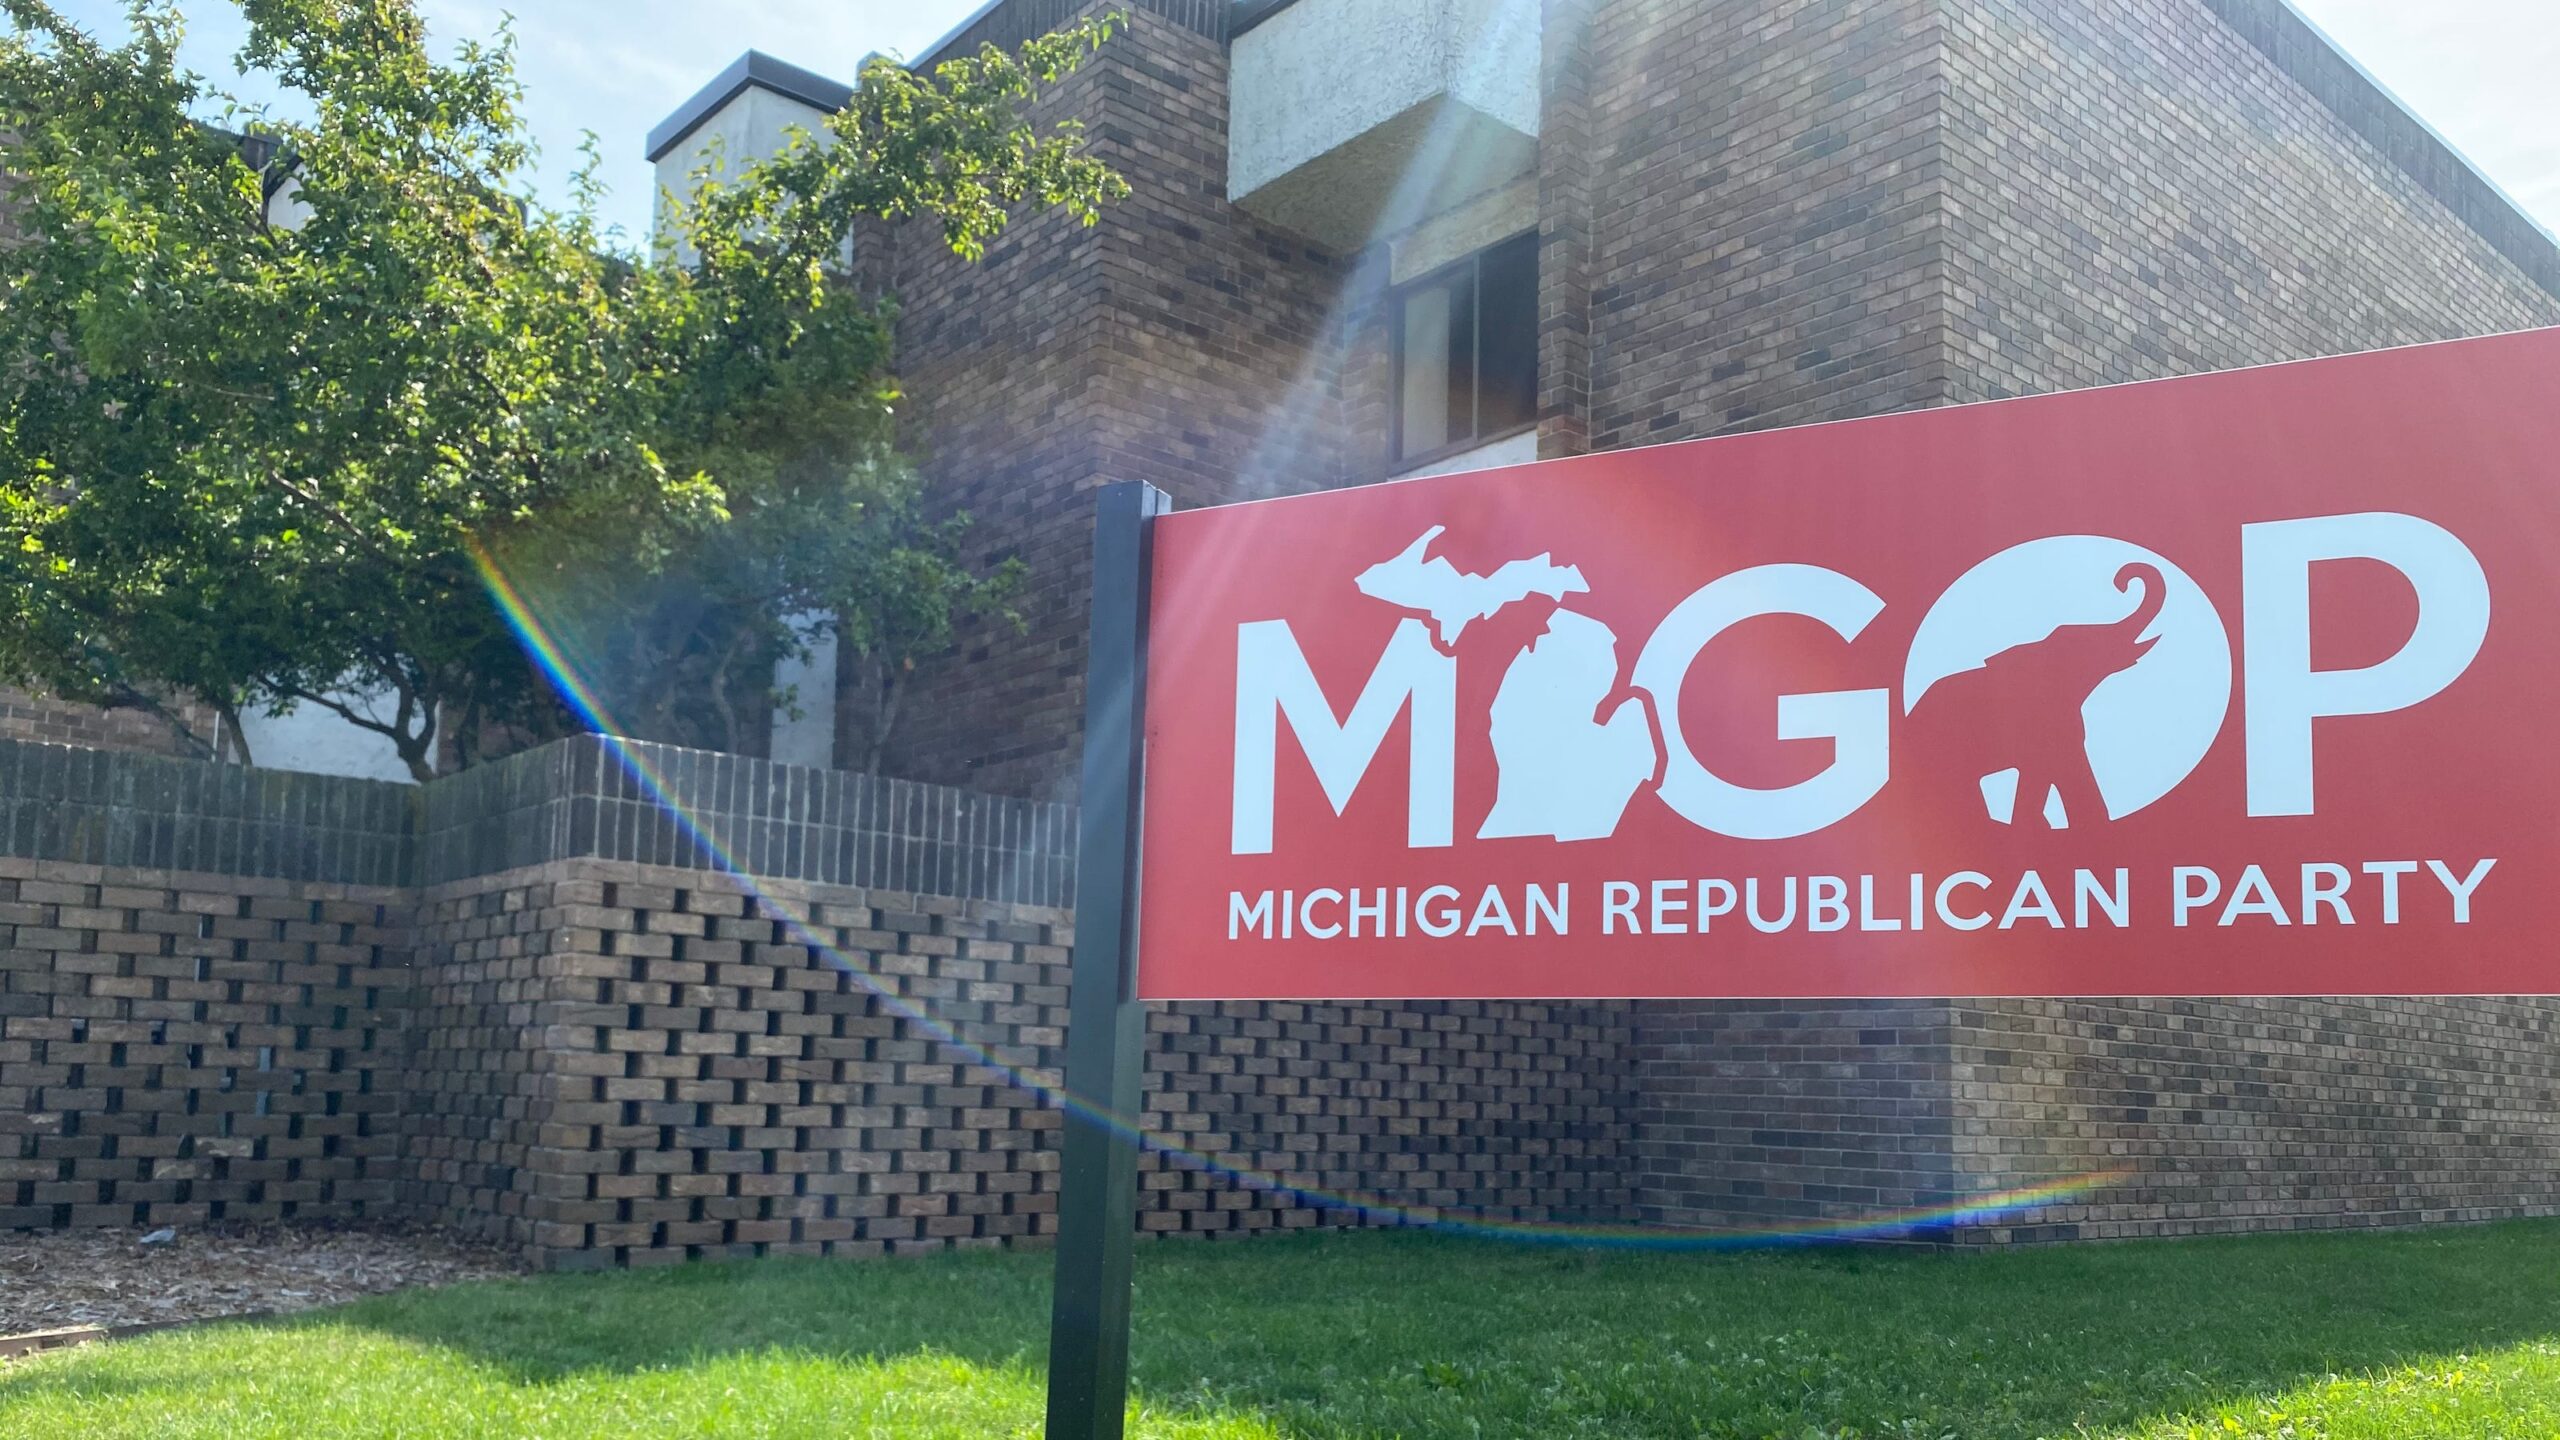 BREAKING: Middle-Aged Man Allegedly Threatens To SHOOT Female MI GOP Worker In Front of MIGOP Headquarters On Primary Election Day…WARNED: The “whole place is getting shot up!”